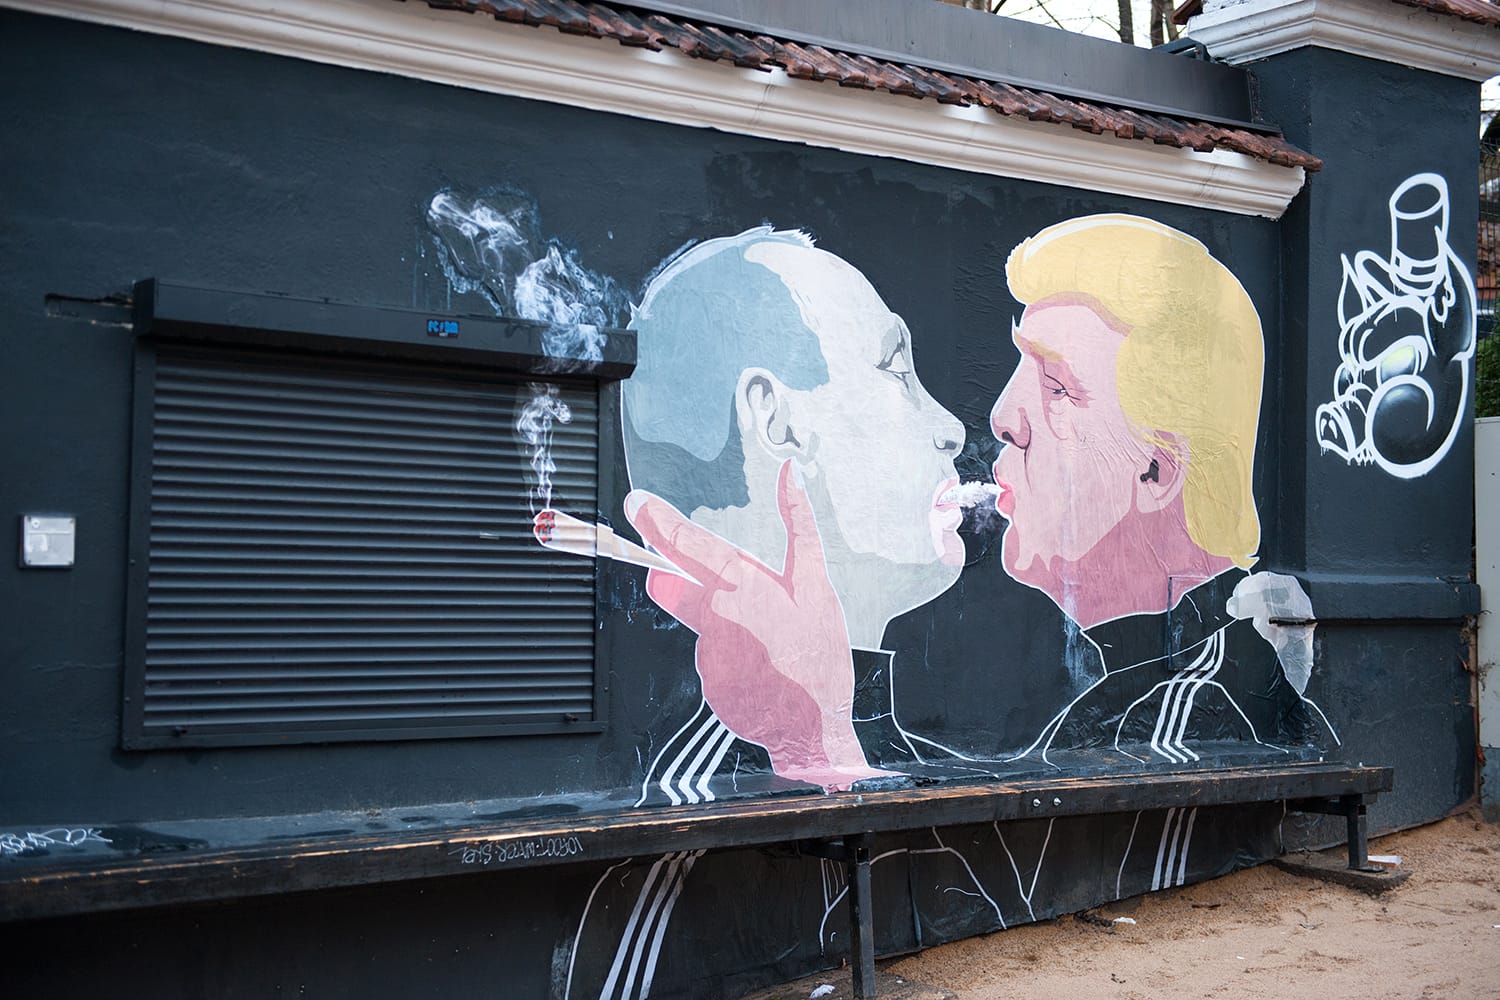 Russian President Vladimir Putin and U.S. president Donald Trump are kissing on the side of a barbecue restaurant in Vilnius, Lithuania